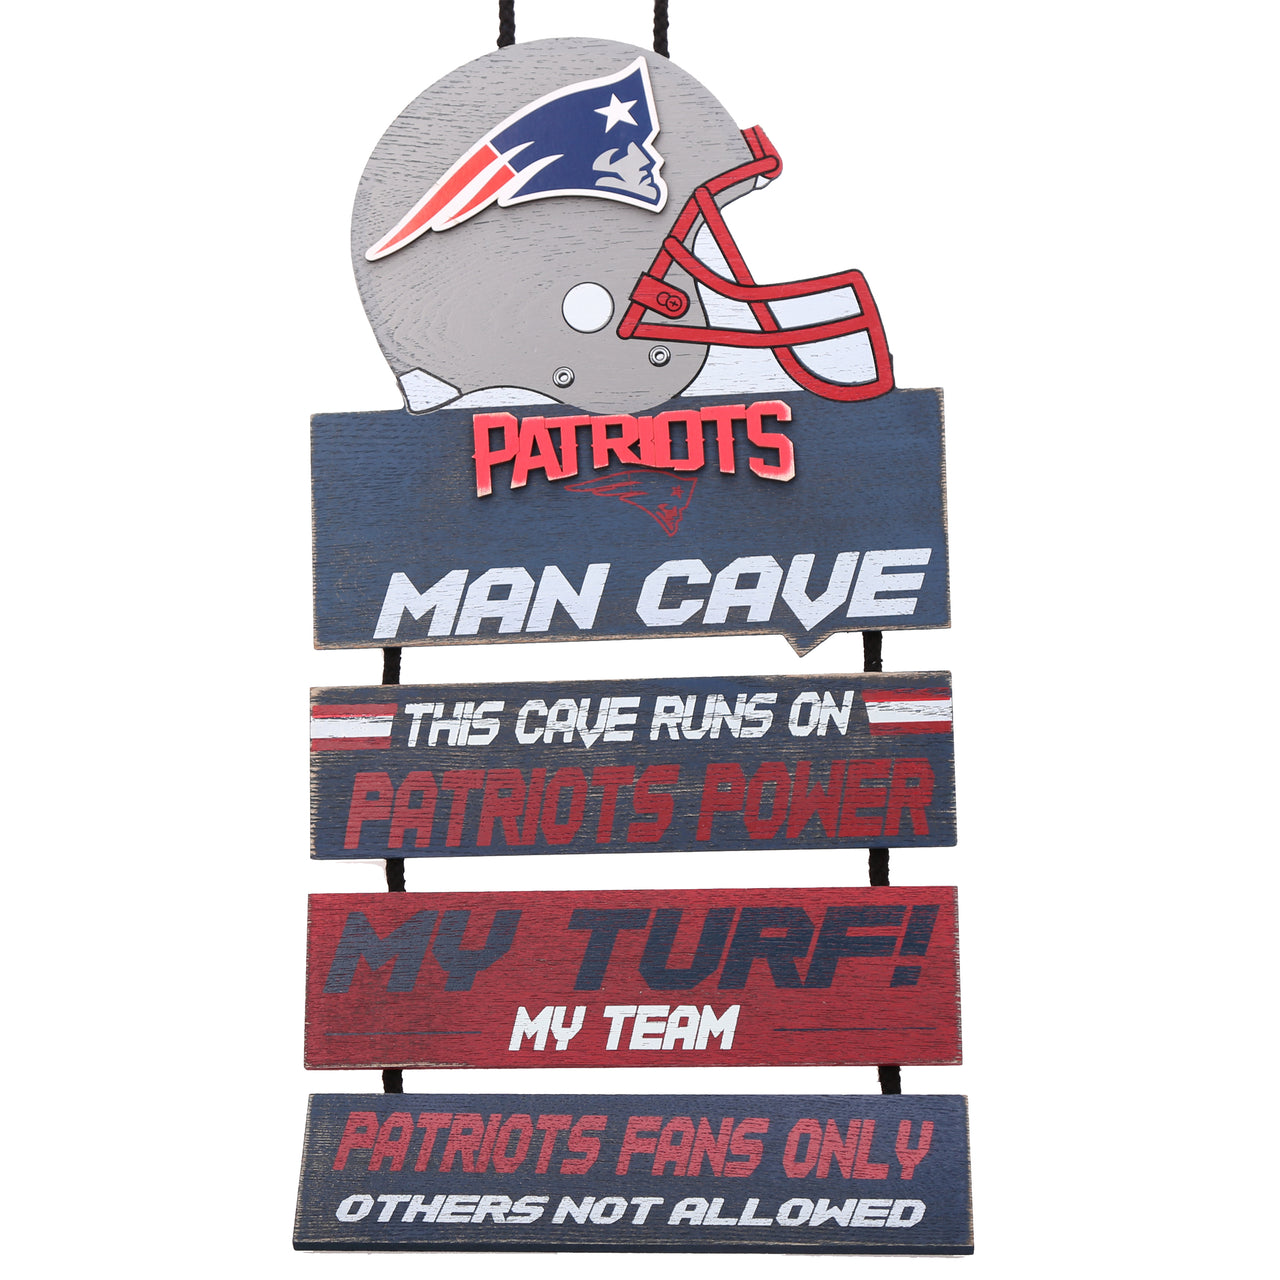 New England Patriots NFL Football Wooden Man Cave Sign - Dynasty Sports & Framing 